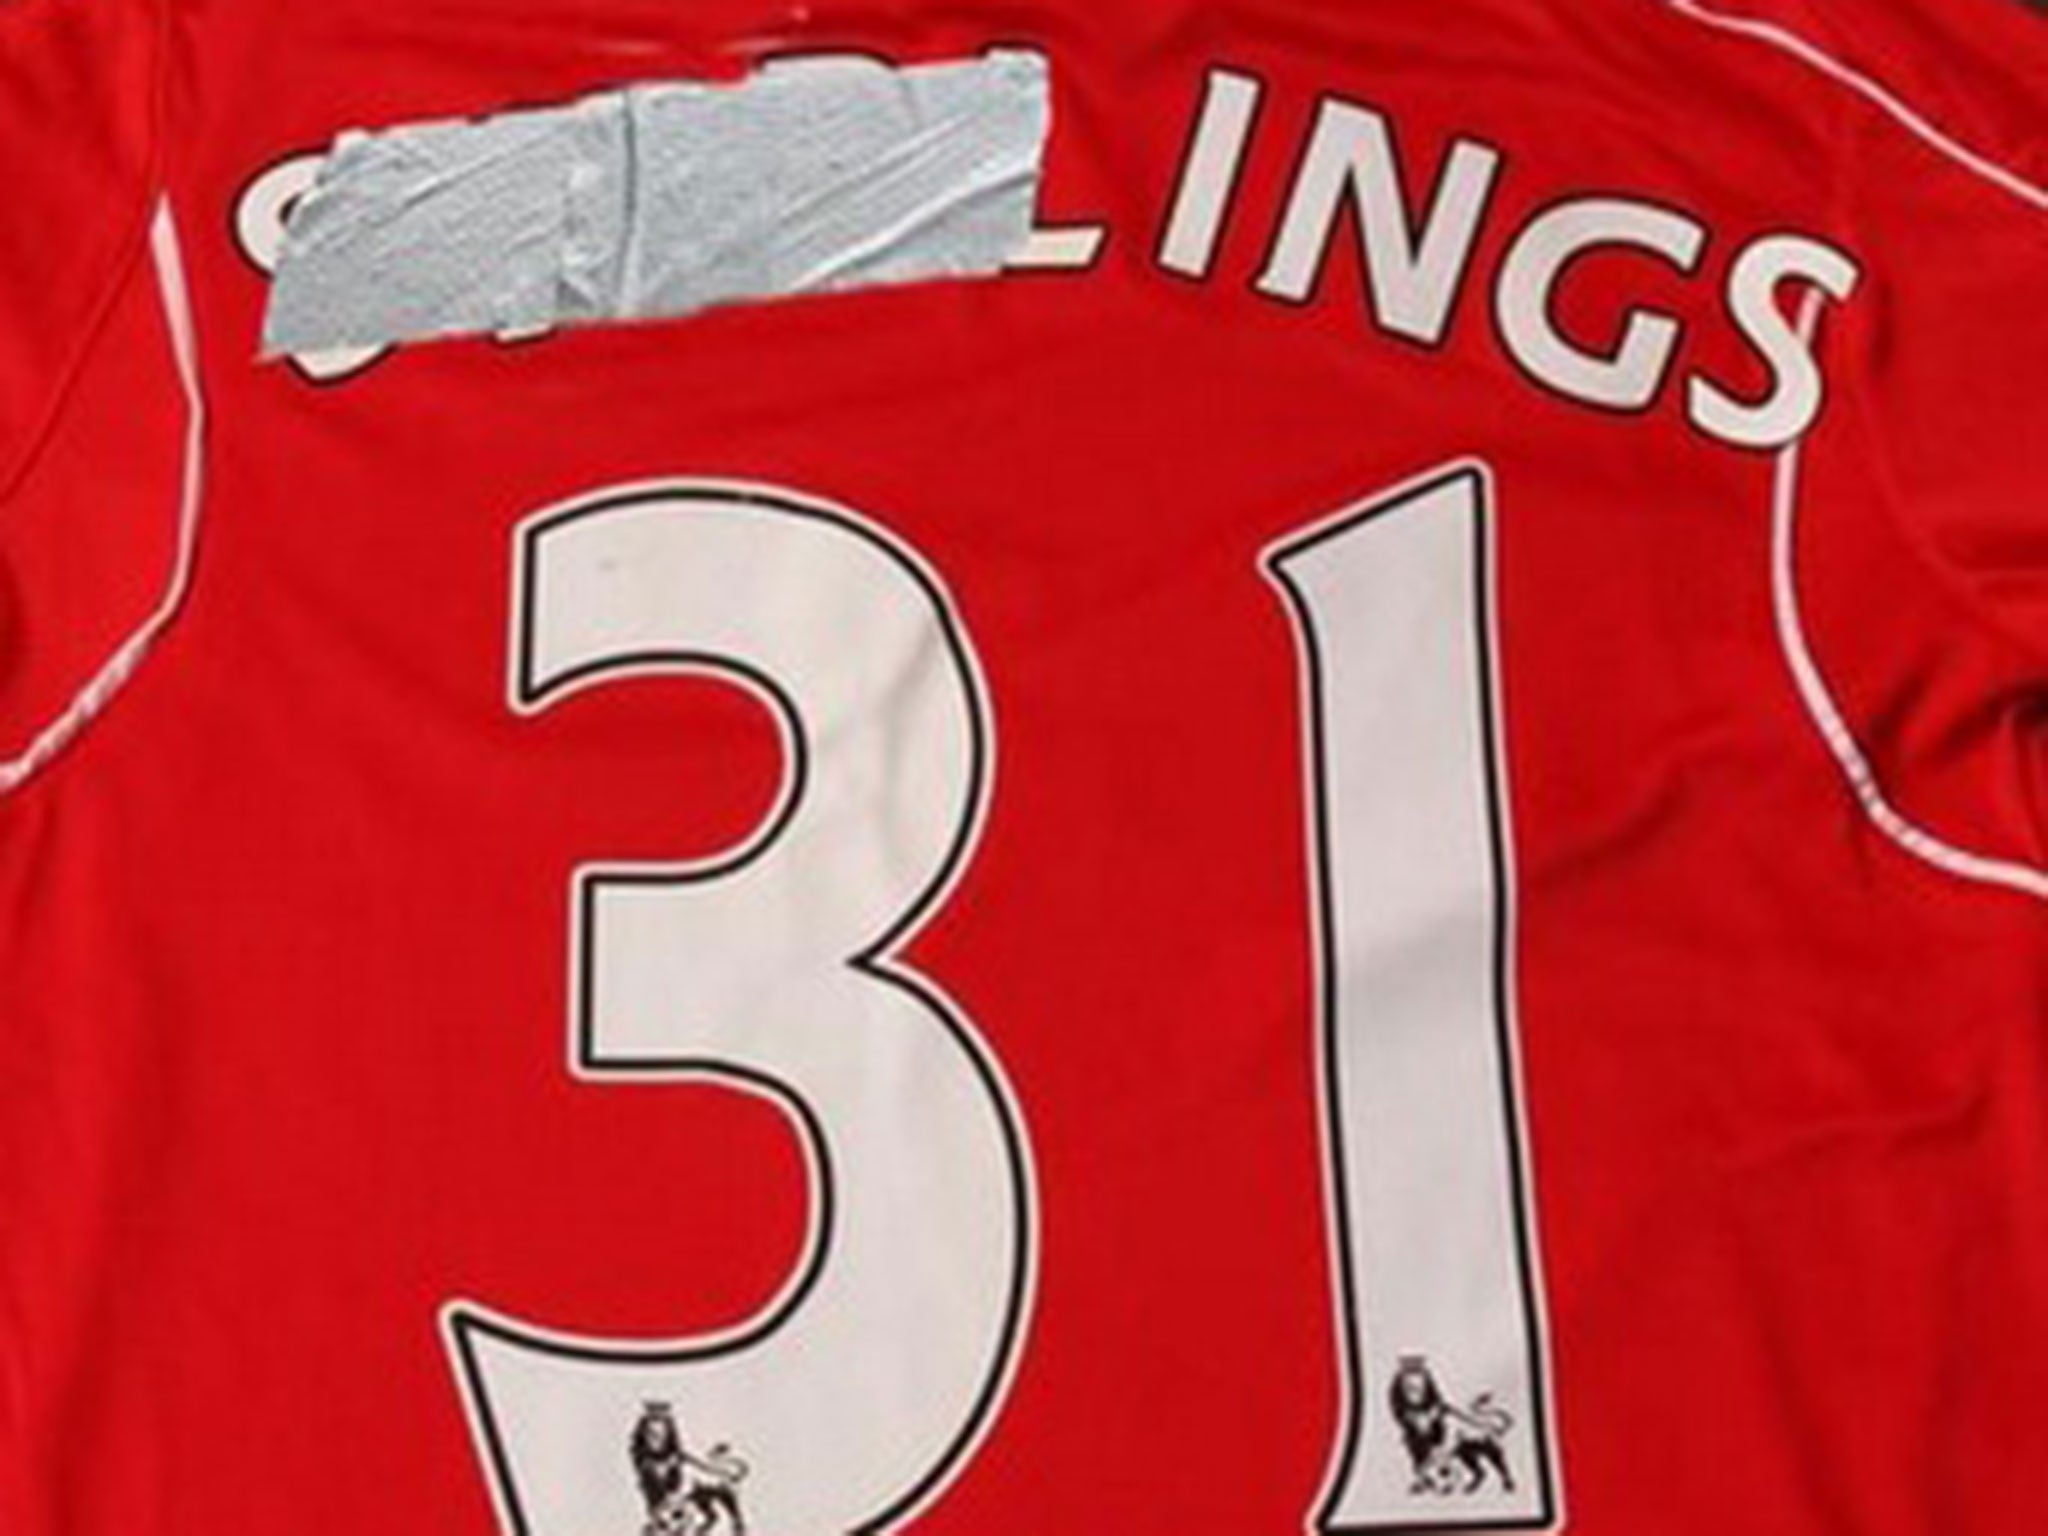 Sterling shirt morphed into an Ings one